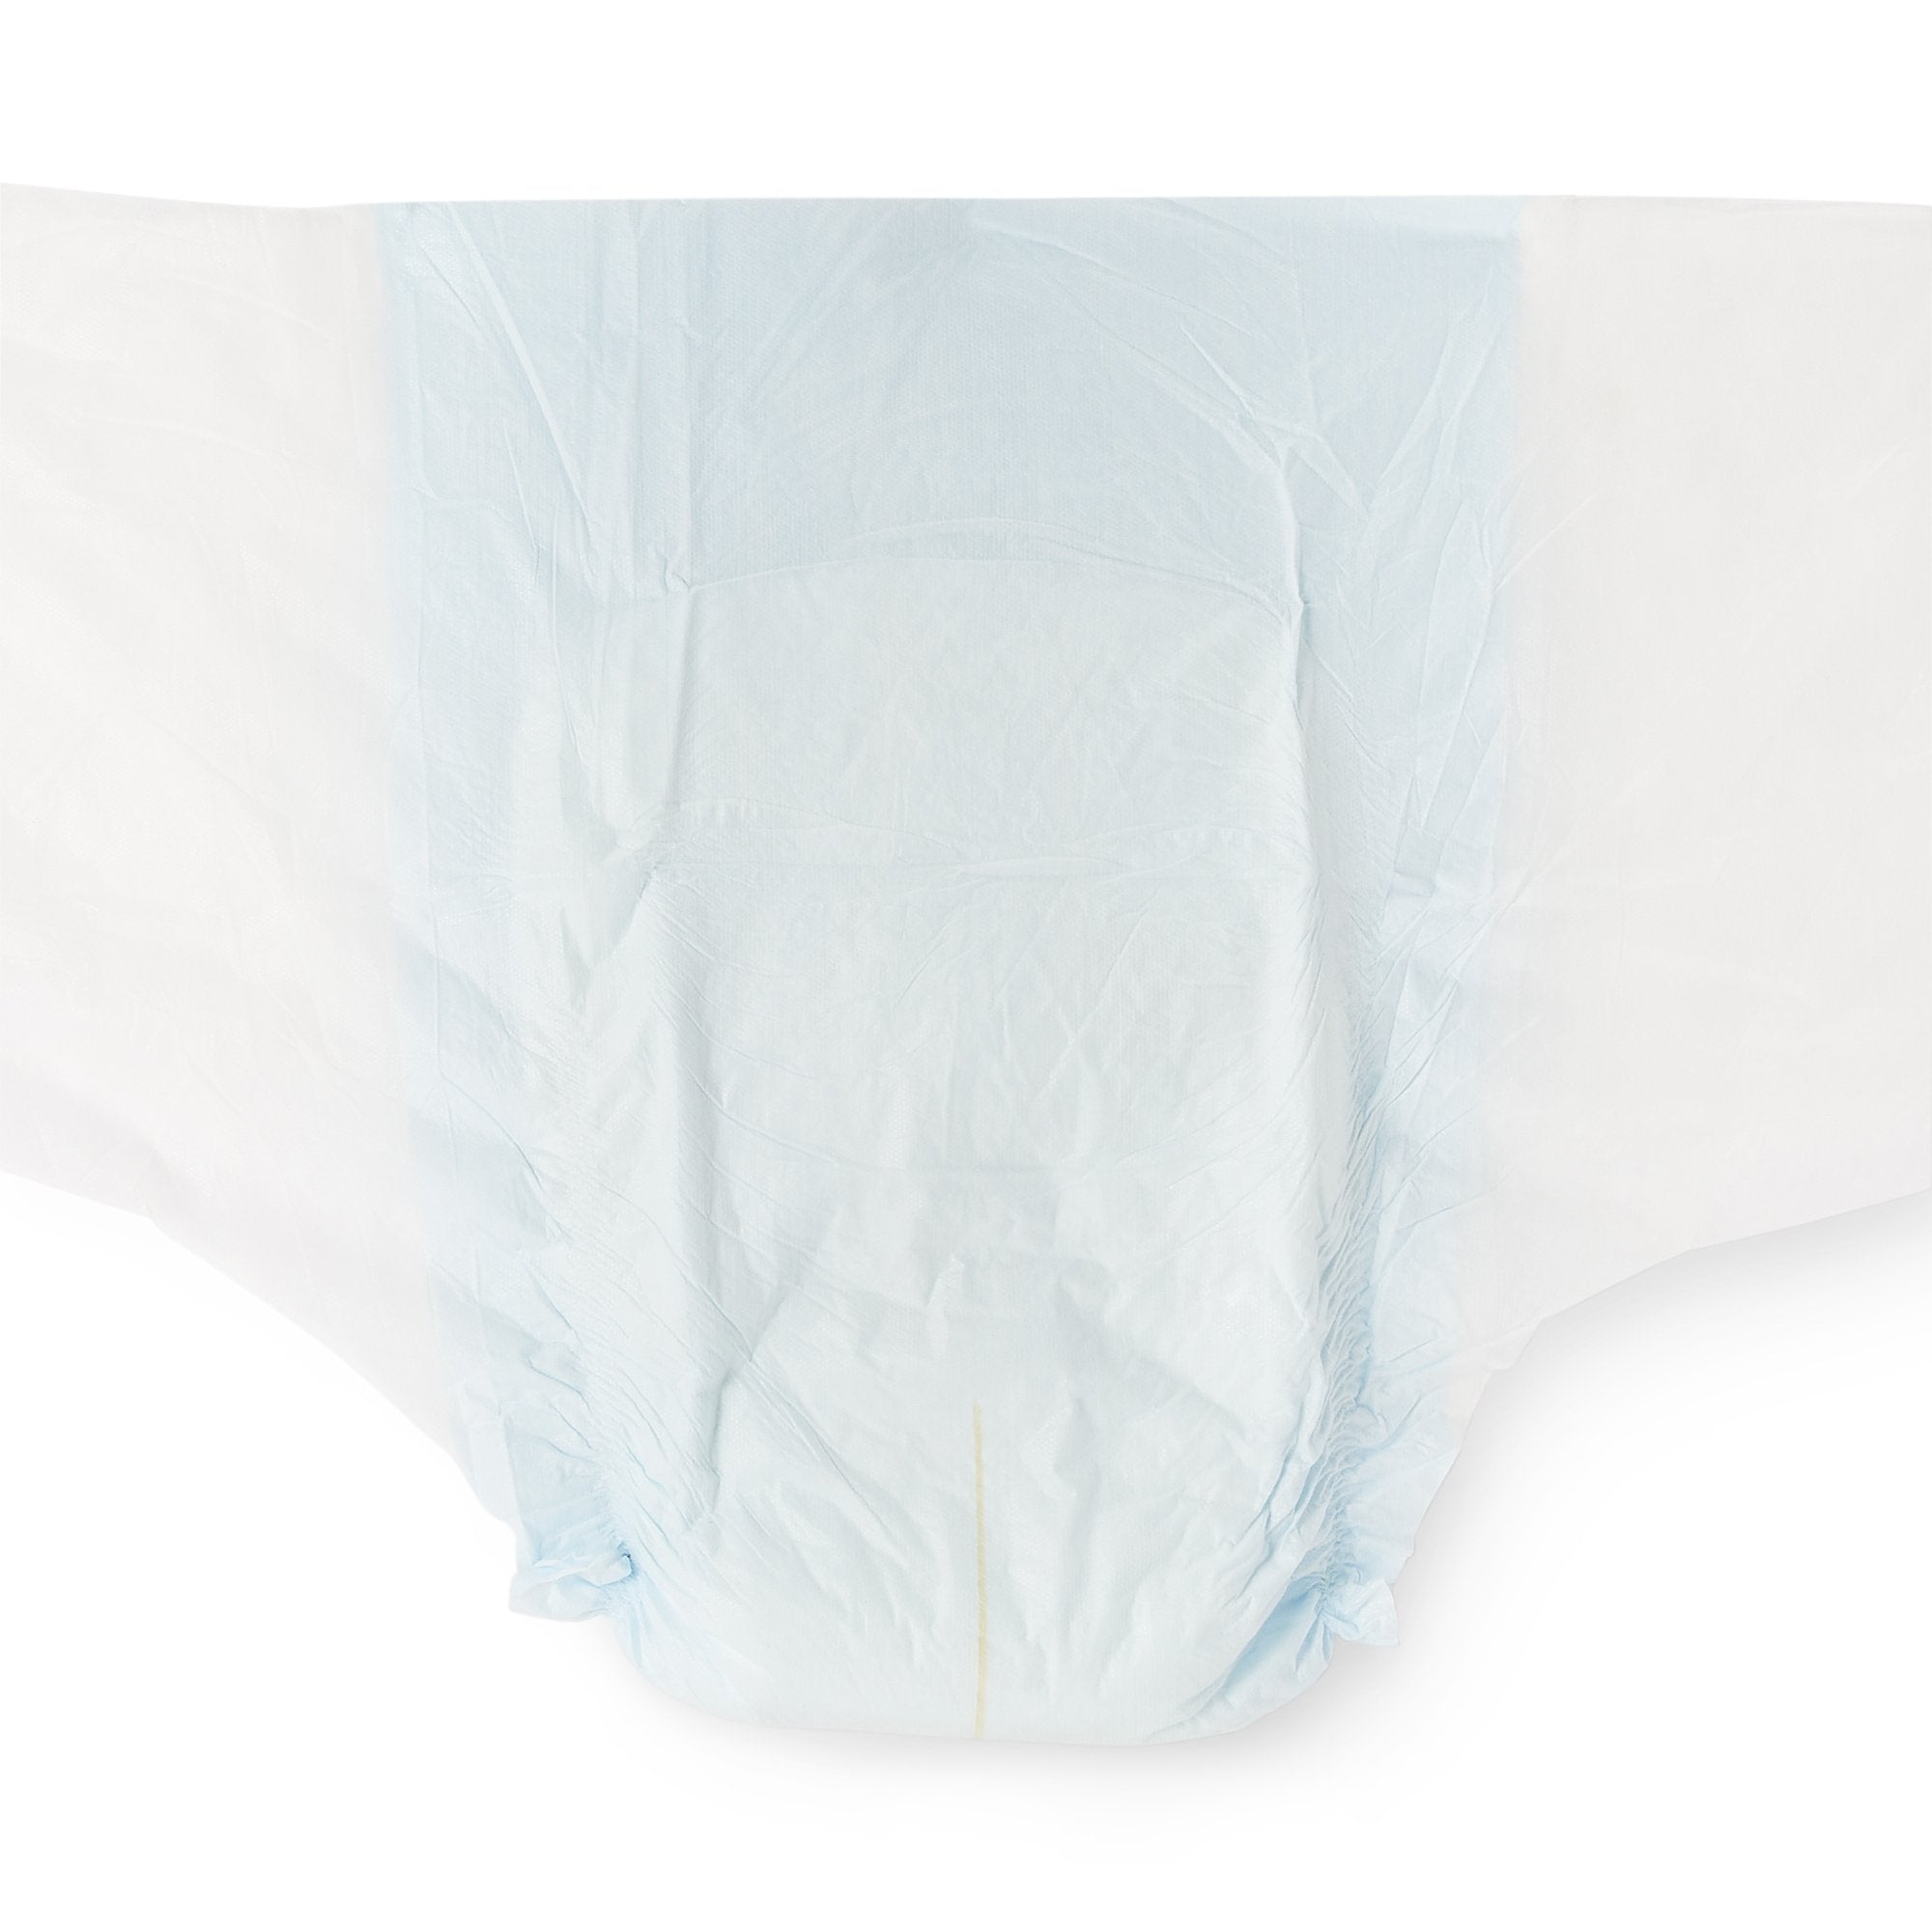 Unisex Adult Incontinence Brief Wings™ Super Large Disposable Heavy Absorbency